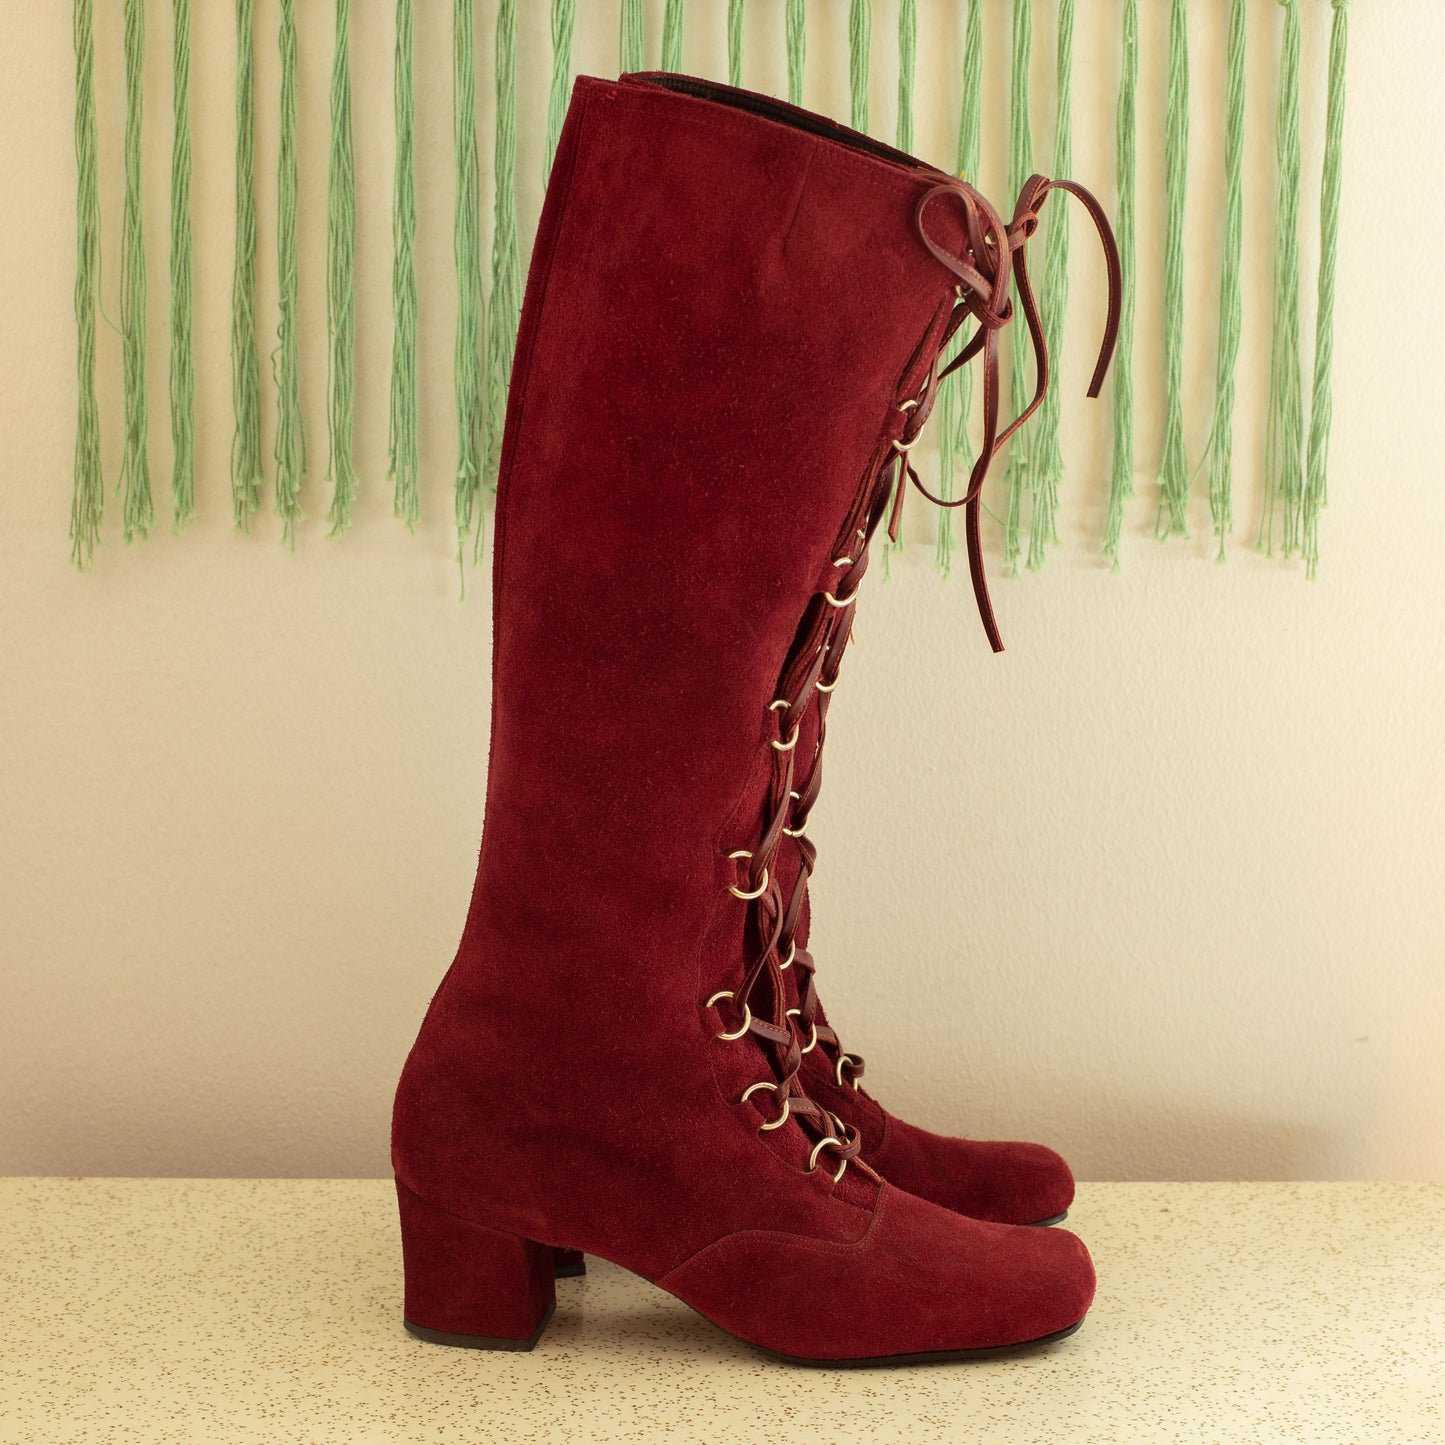 Vintage 1960s Red Suede Lace Up Gogo Boots